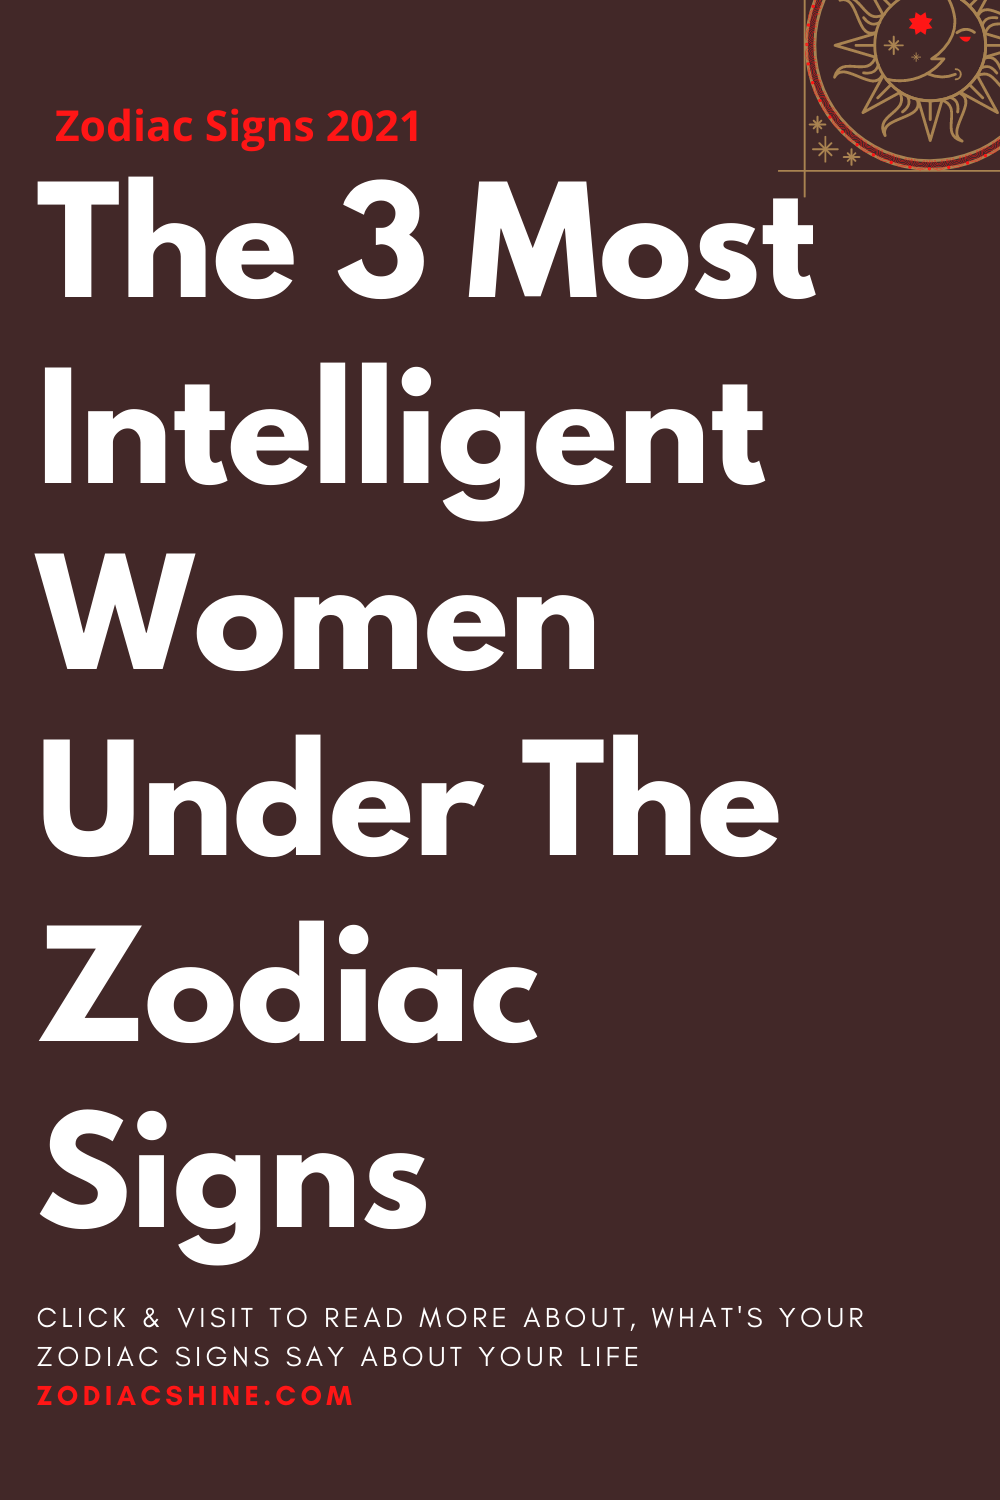 The 3 Most Intelligent Women Under The Zodiac Signs